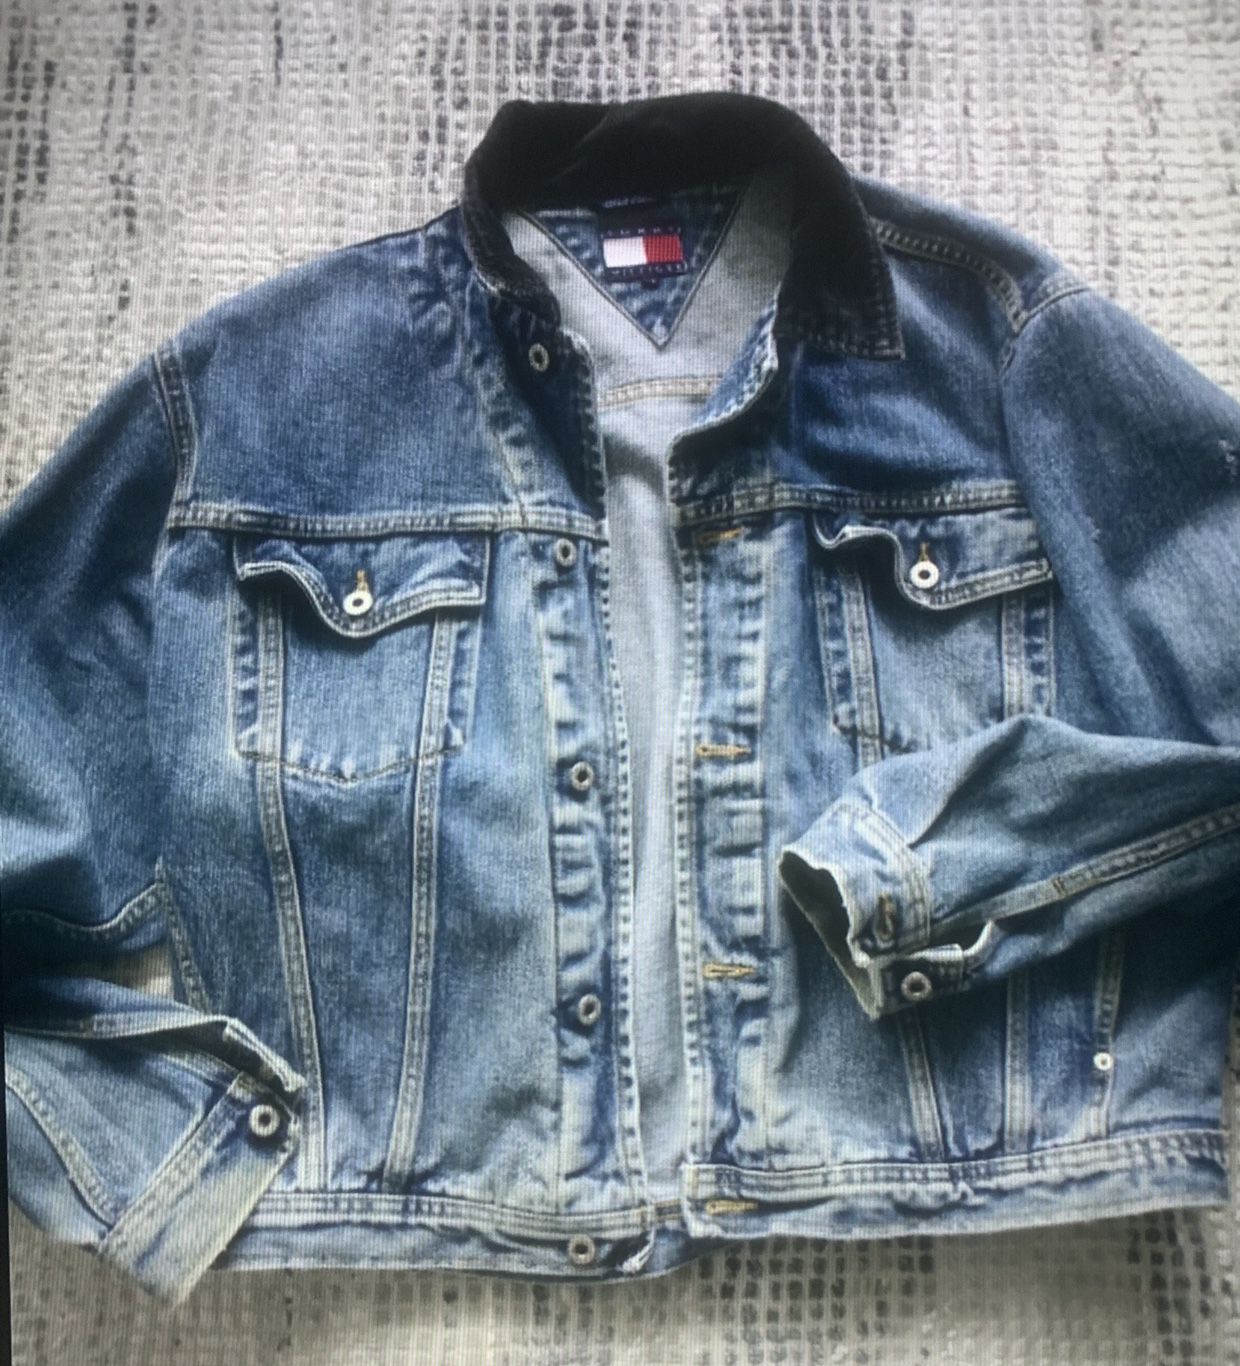 Vintage Tommy Hilfiger jean Polo jacket with black corduroy collar size large